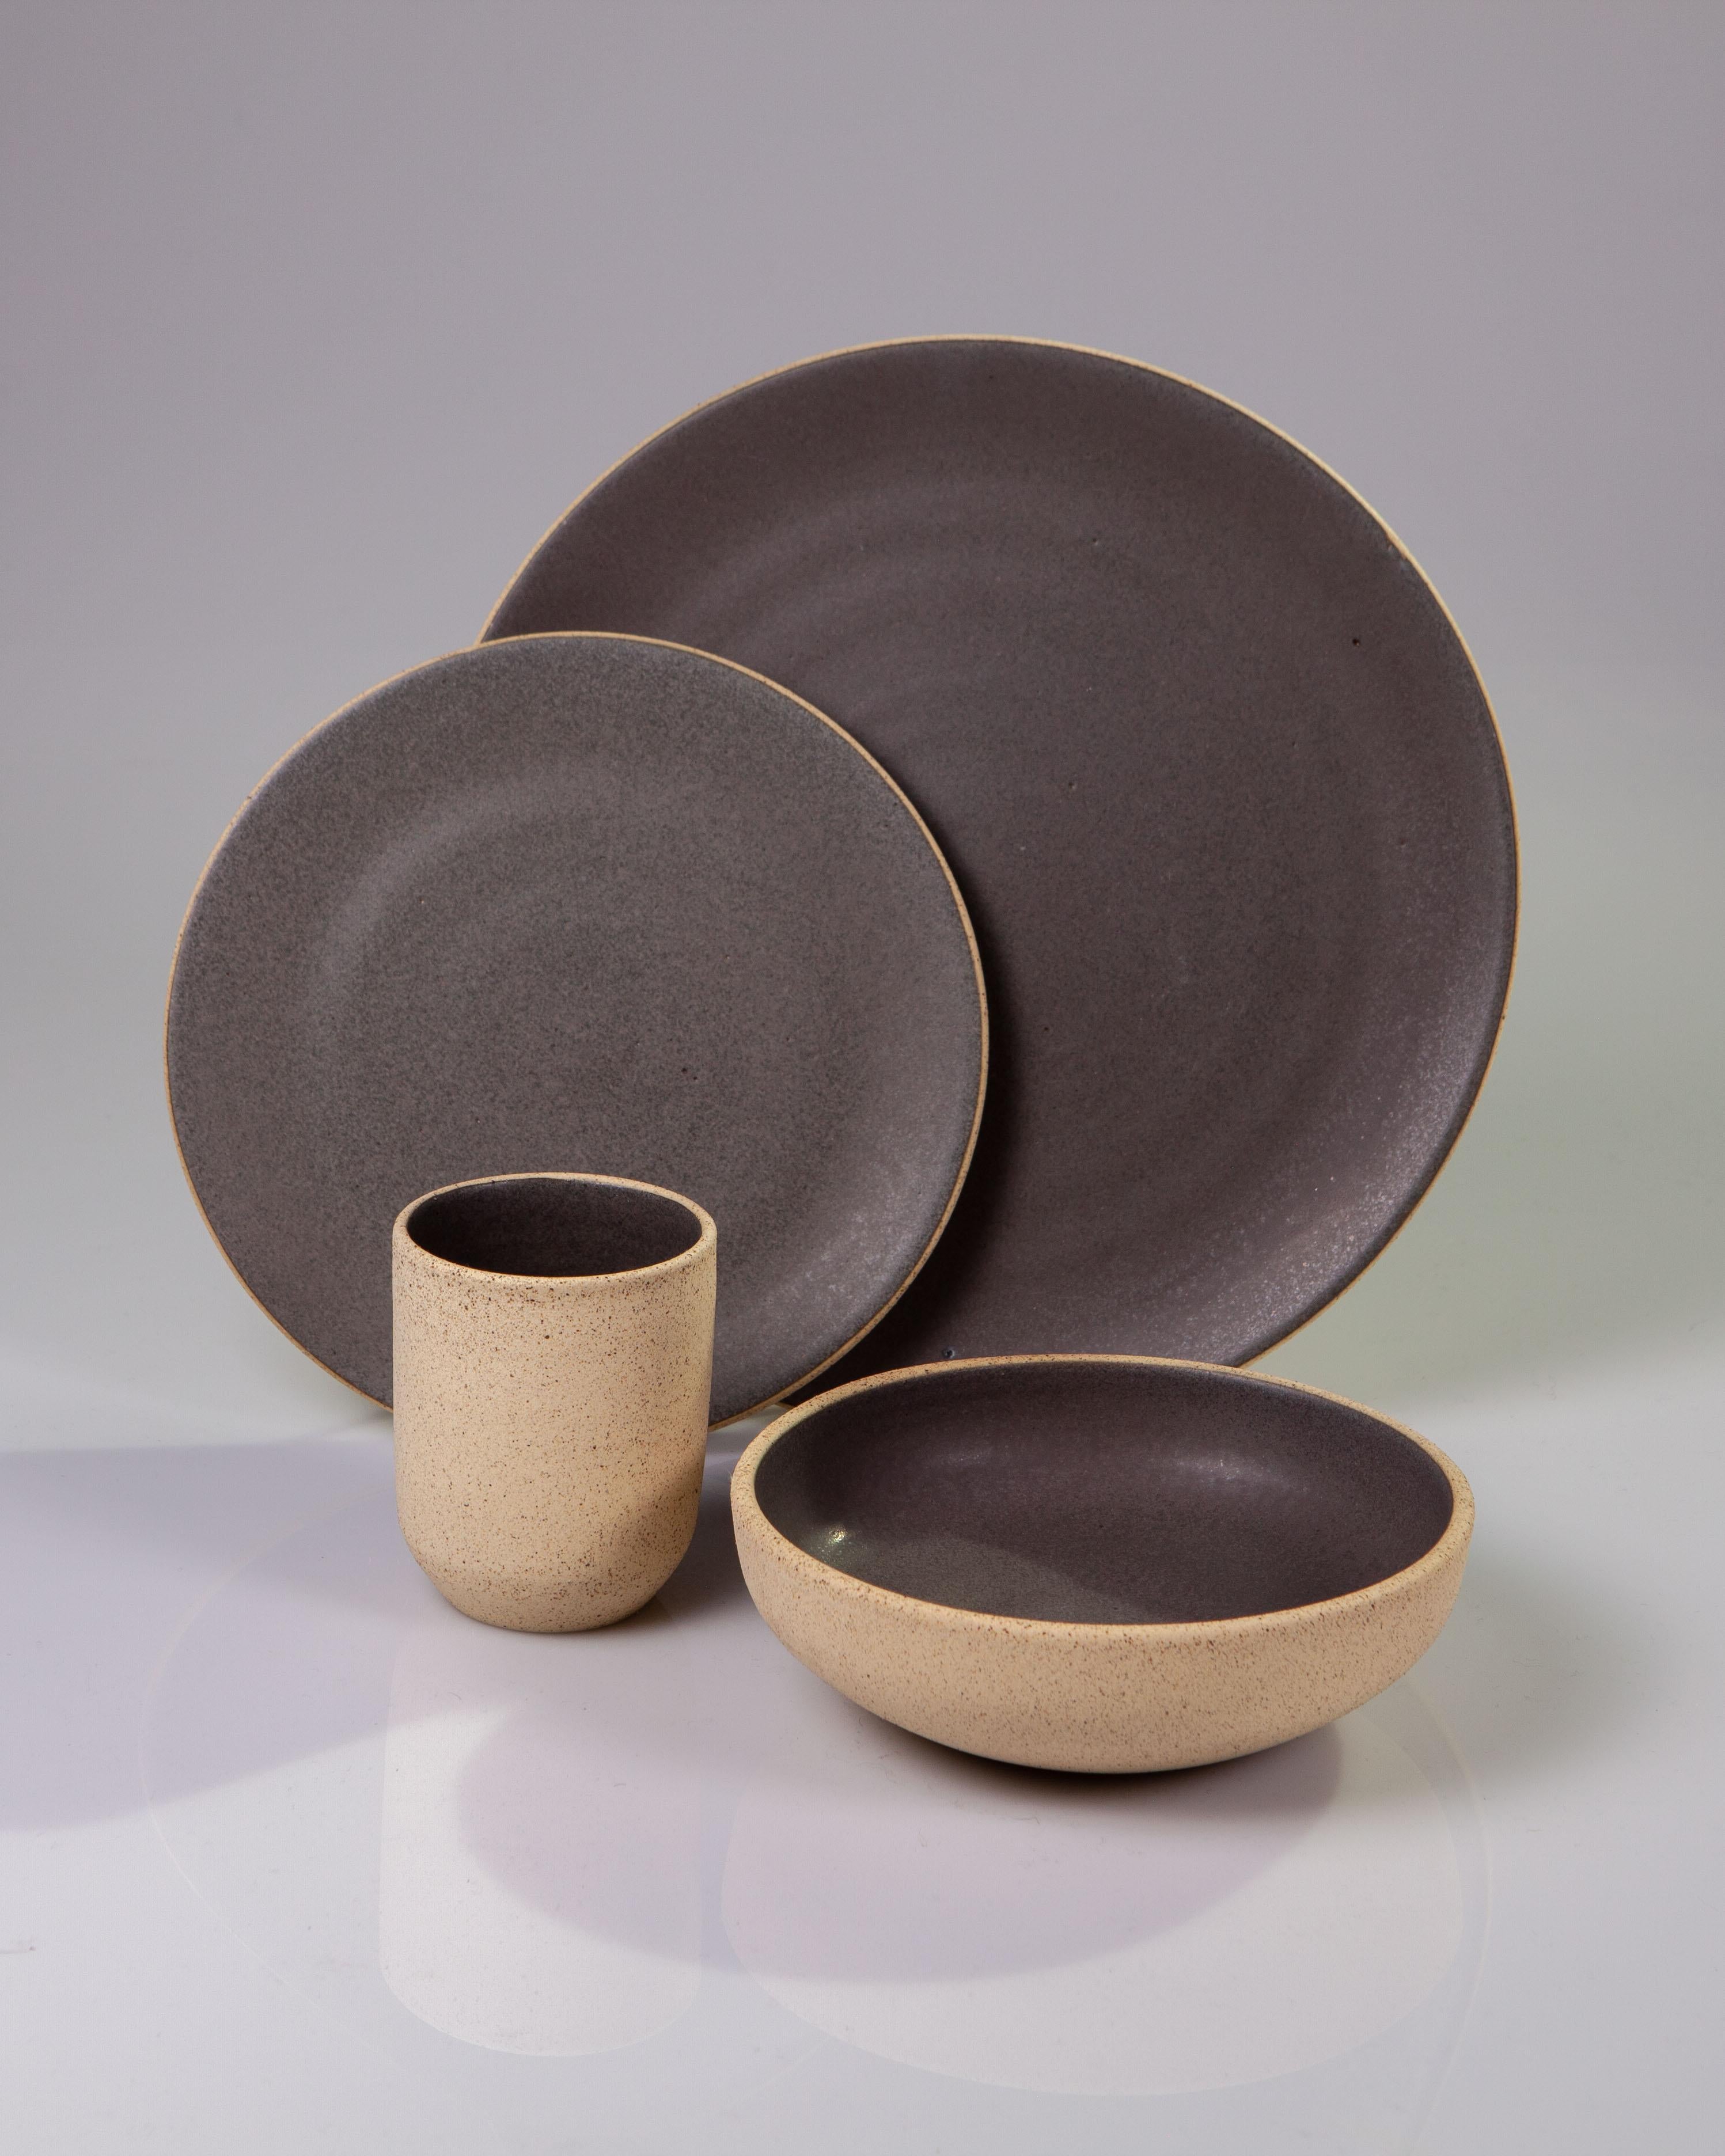 Handmade dinnerware from Tlaquepaque, Jalisco, Mexico, by a family of ceramicists that have been creating handmade earthenware for over 60 years, these pieces are made using multigenerational techniques yet designed for the modern table. Their clean